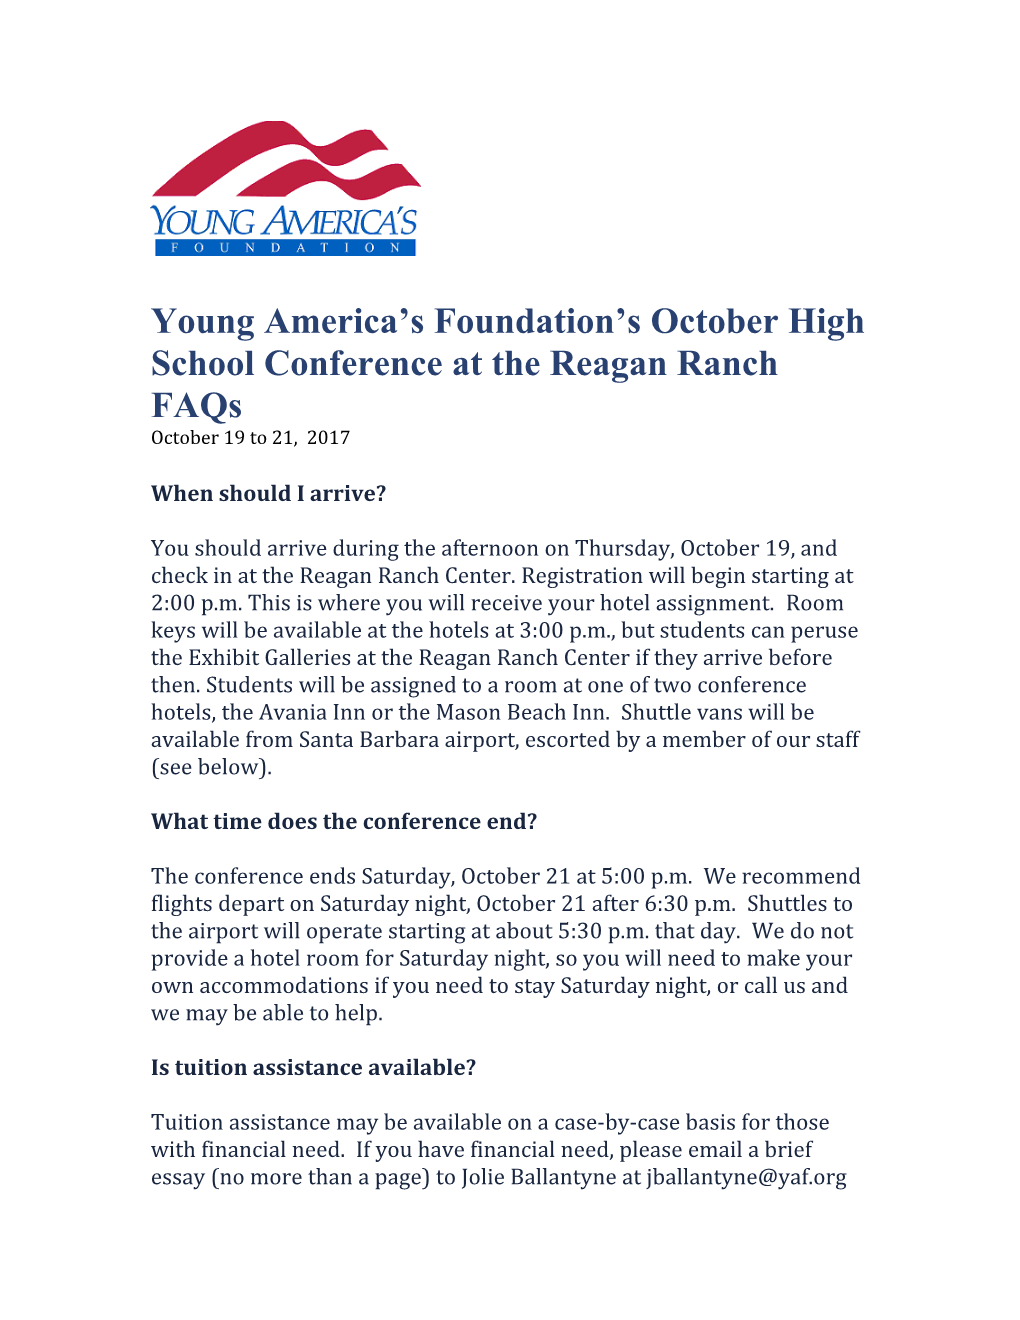 Young America S Foundation S October High School Conference at the Reagan Ranch Faqs